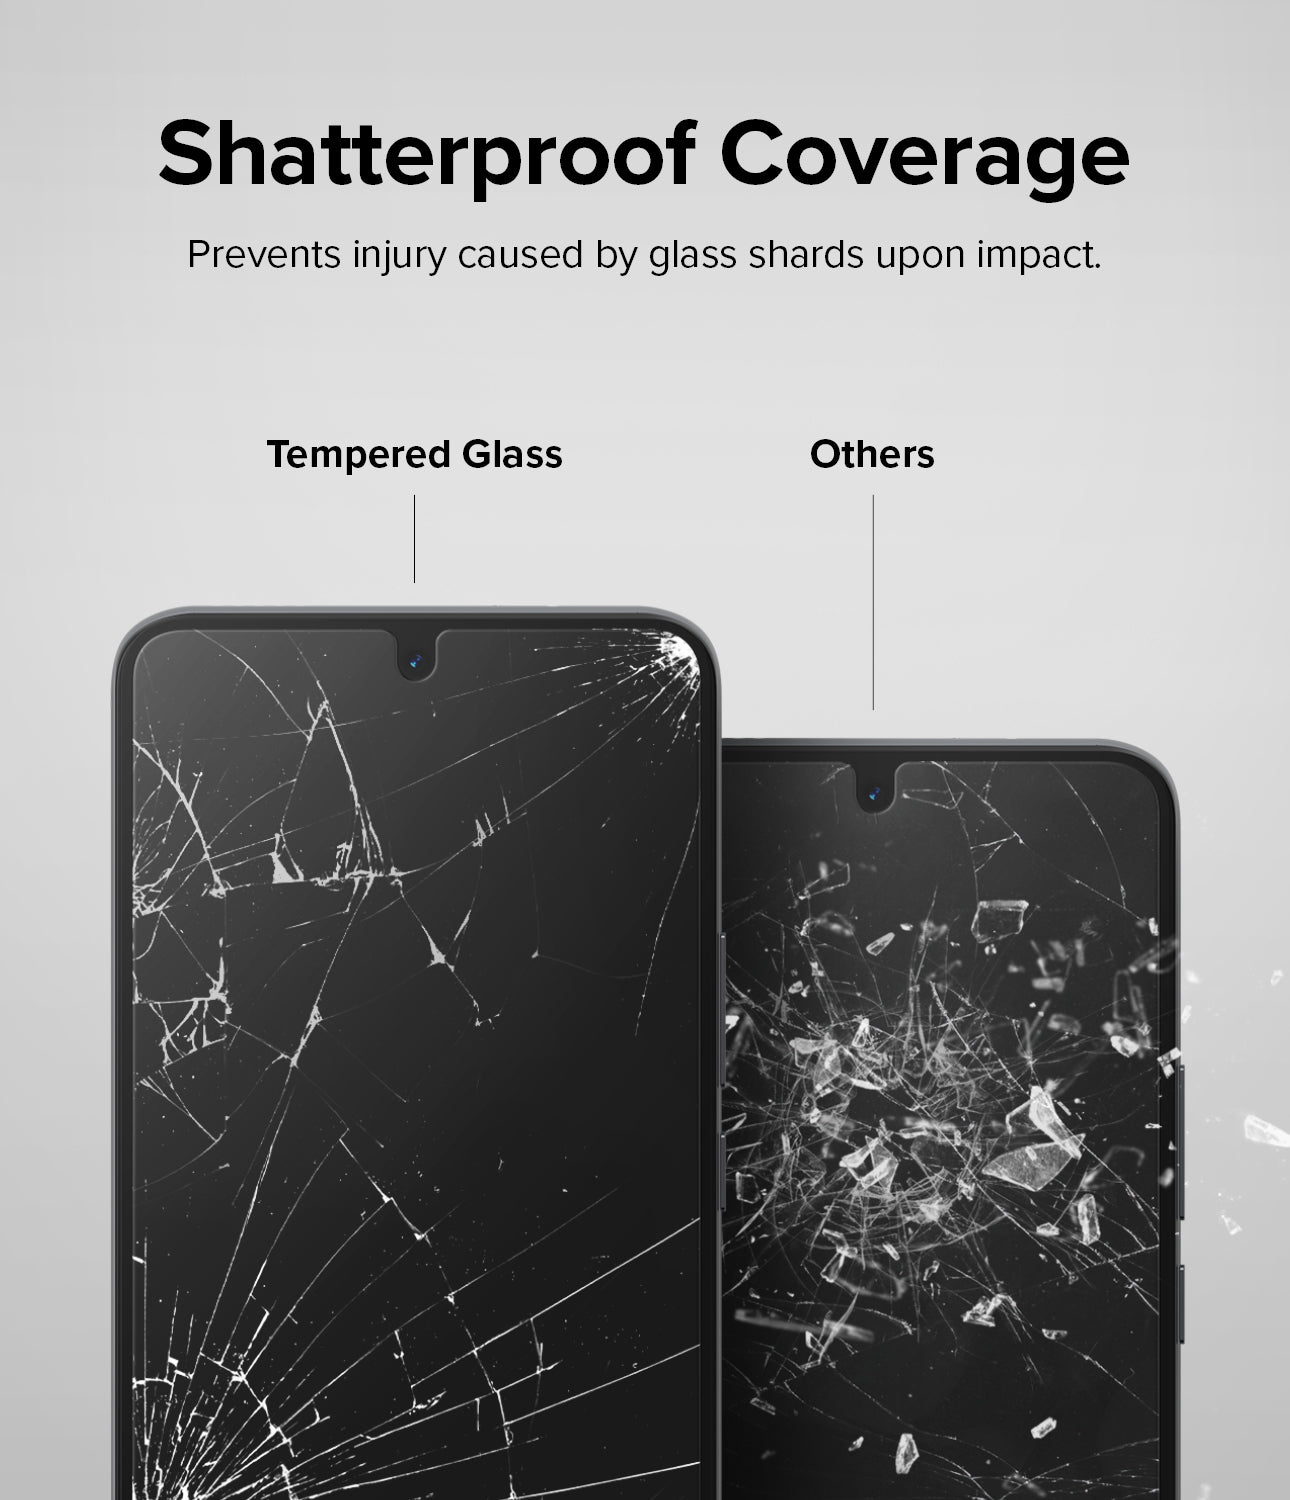 Shatterproof Coverage - Prevents injury caused by glass shards upon impact.